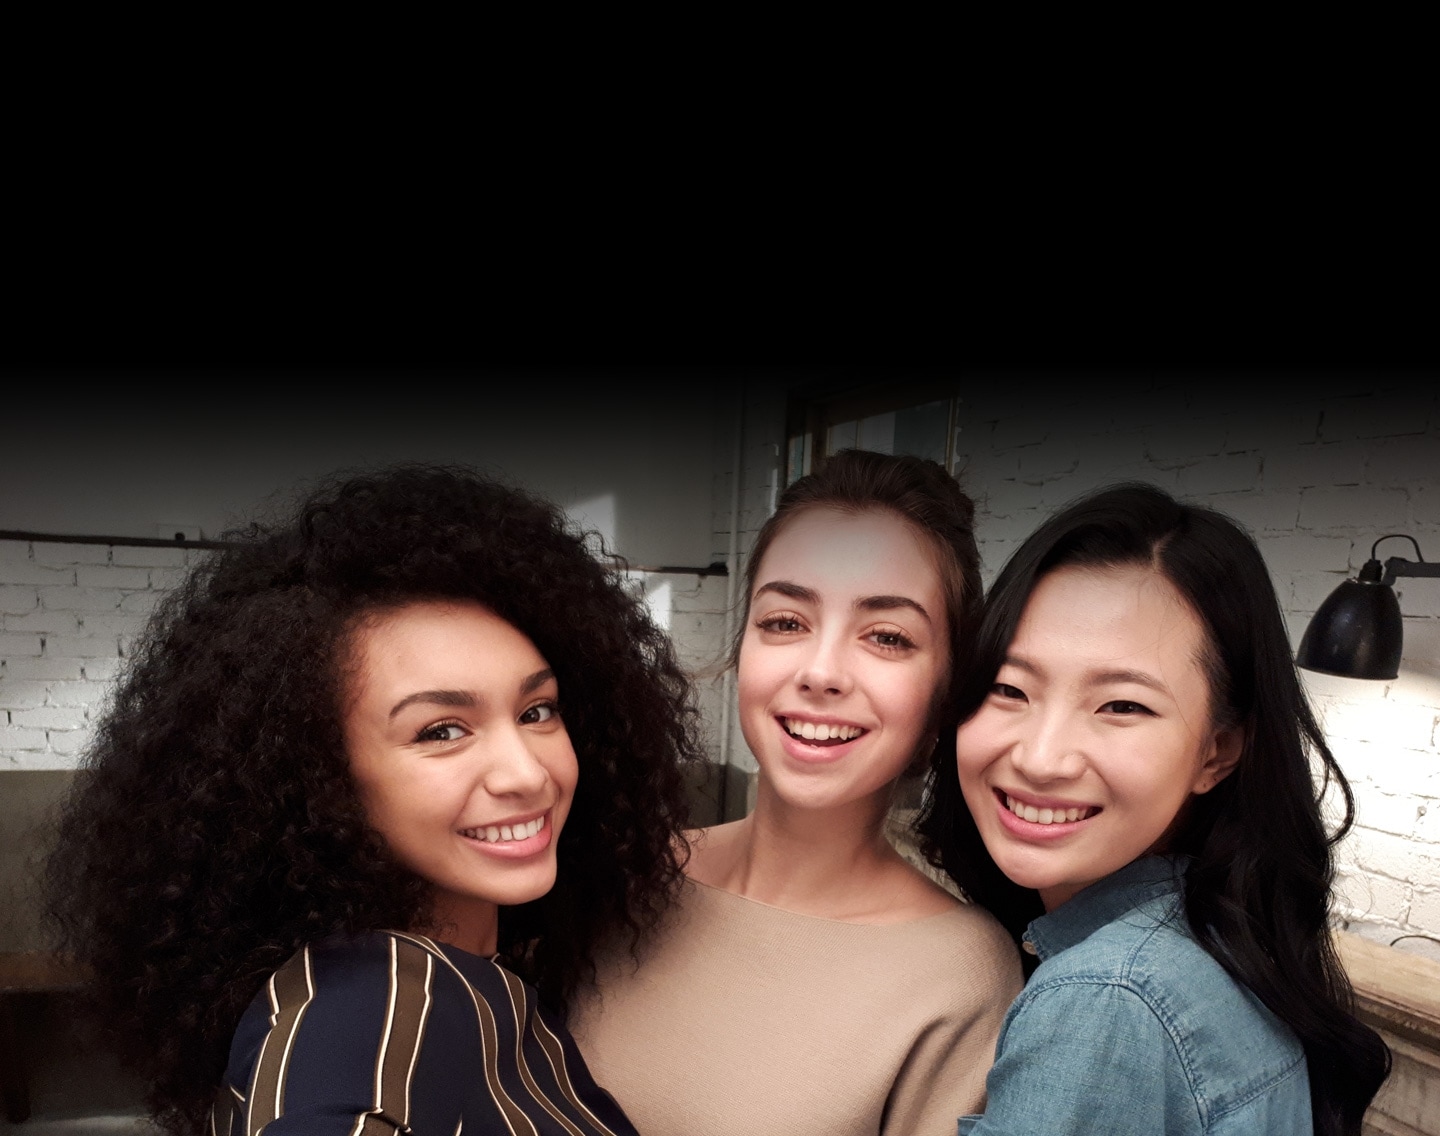 Selfie image of three women taken in low-light to show the advanced camera functionality of the Galaxy A5 (2017).